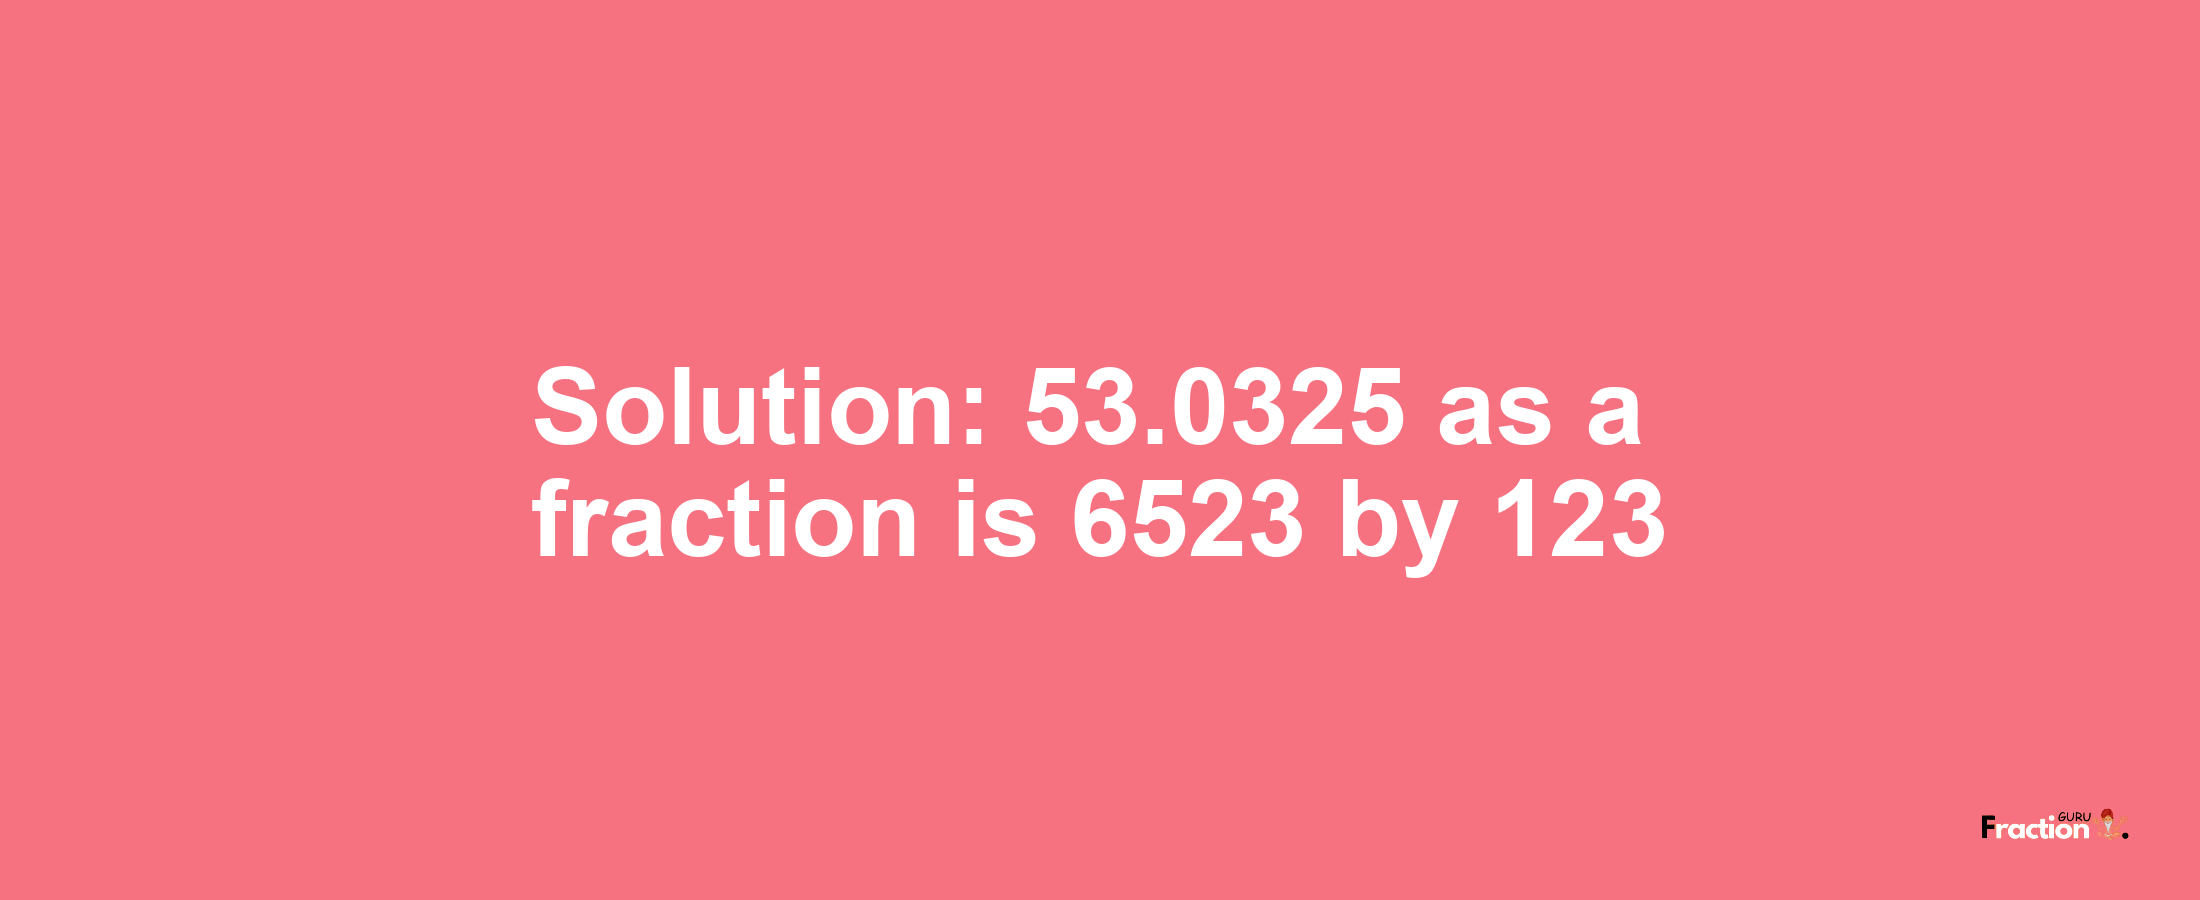 Solution:53.0325 as a fraction is 6523/123